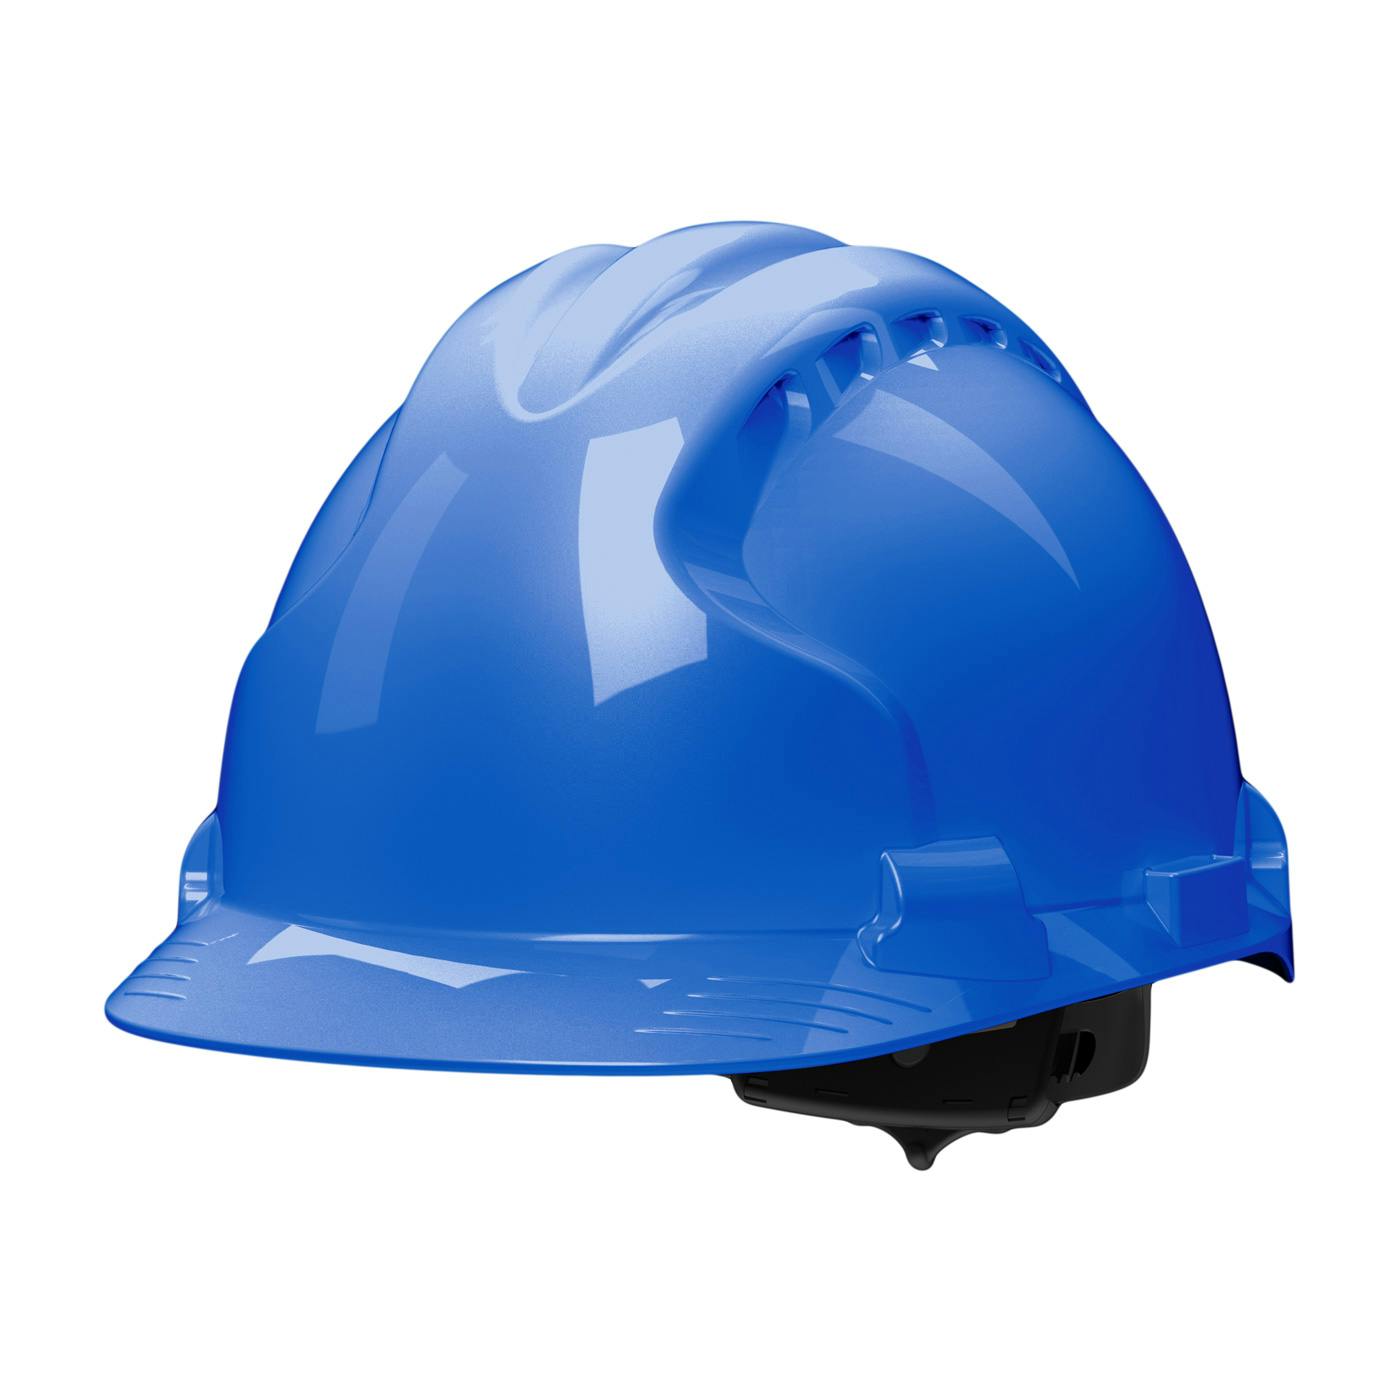 MK8 Evolution® Type II Hard Hat with HDPE Shell, EPS Impact Liner, Polyester Suspension and Wheel Ratchet Adjustment (280-AHS150)